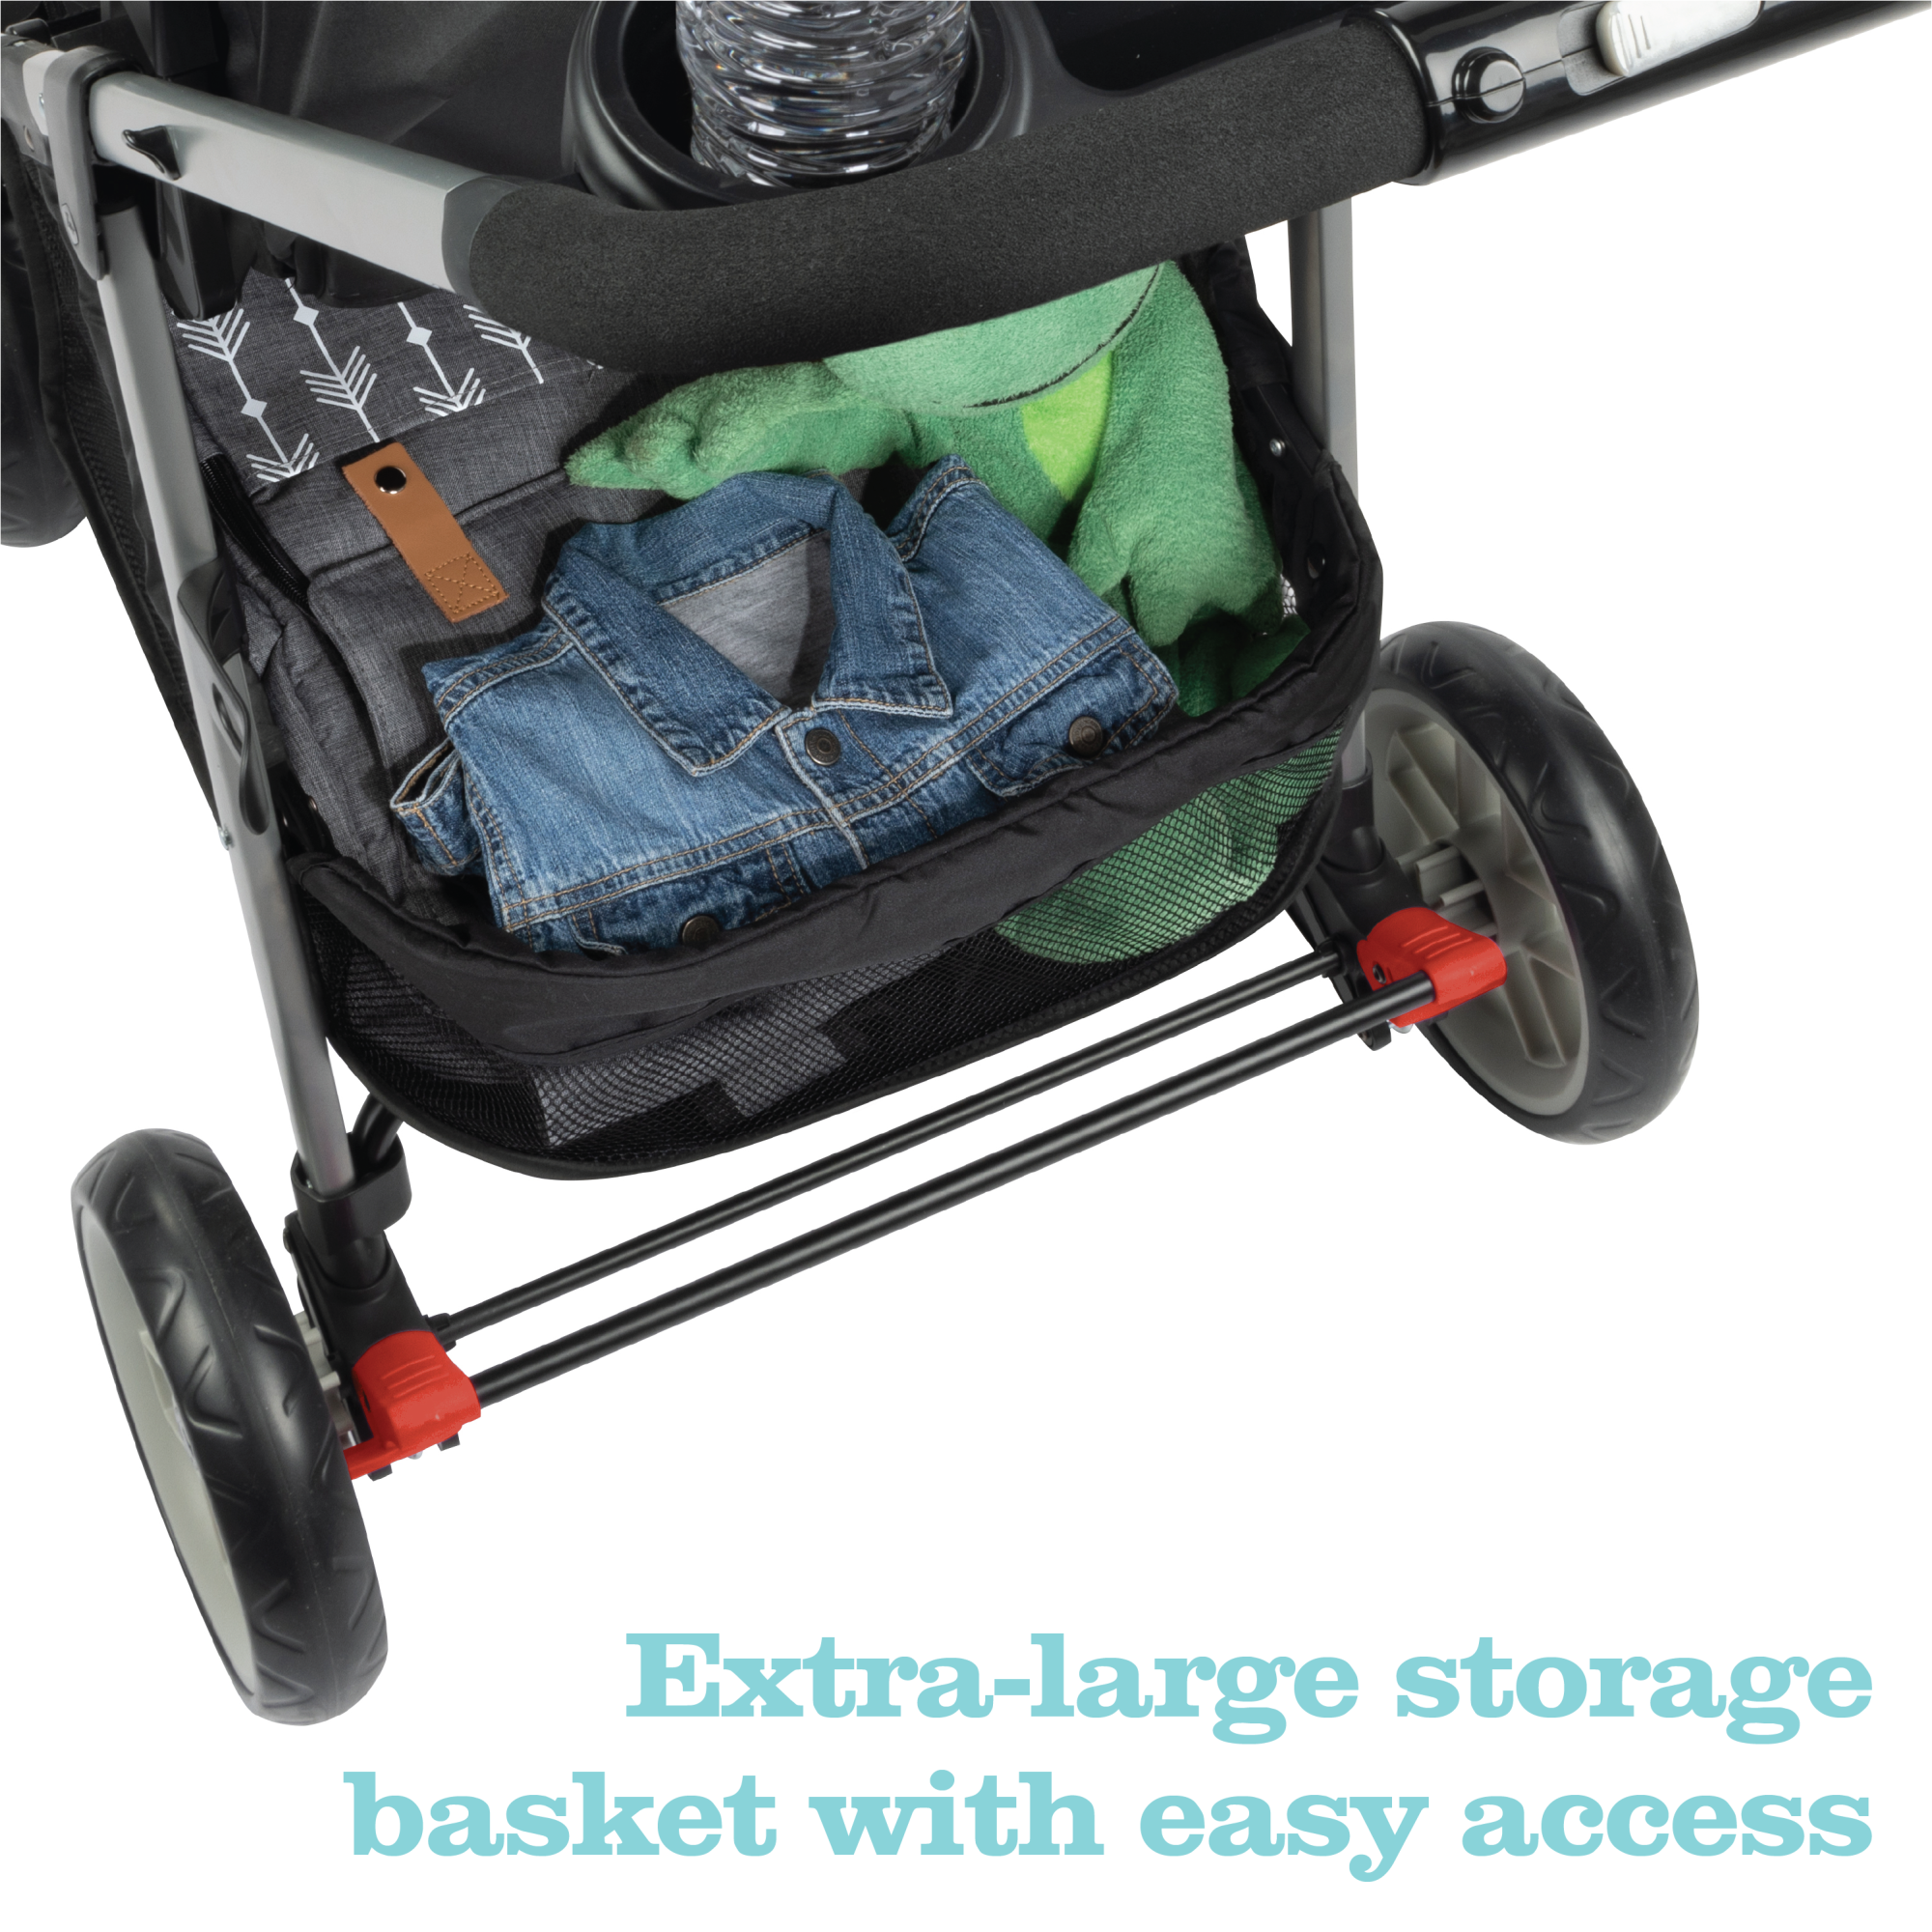 Disney Baby Grow and Go™ Modular Travel System - extra-large storage basket with easy access